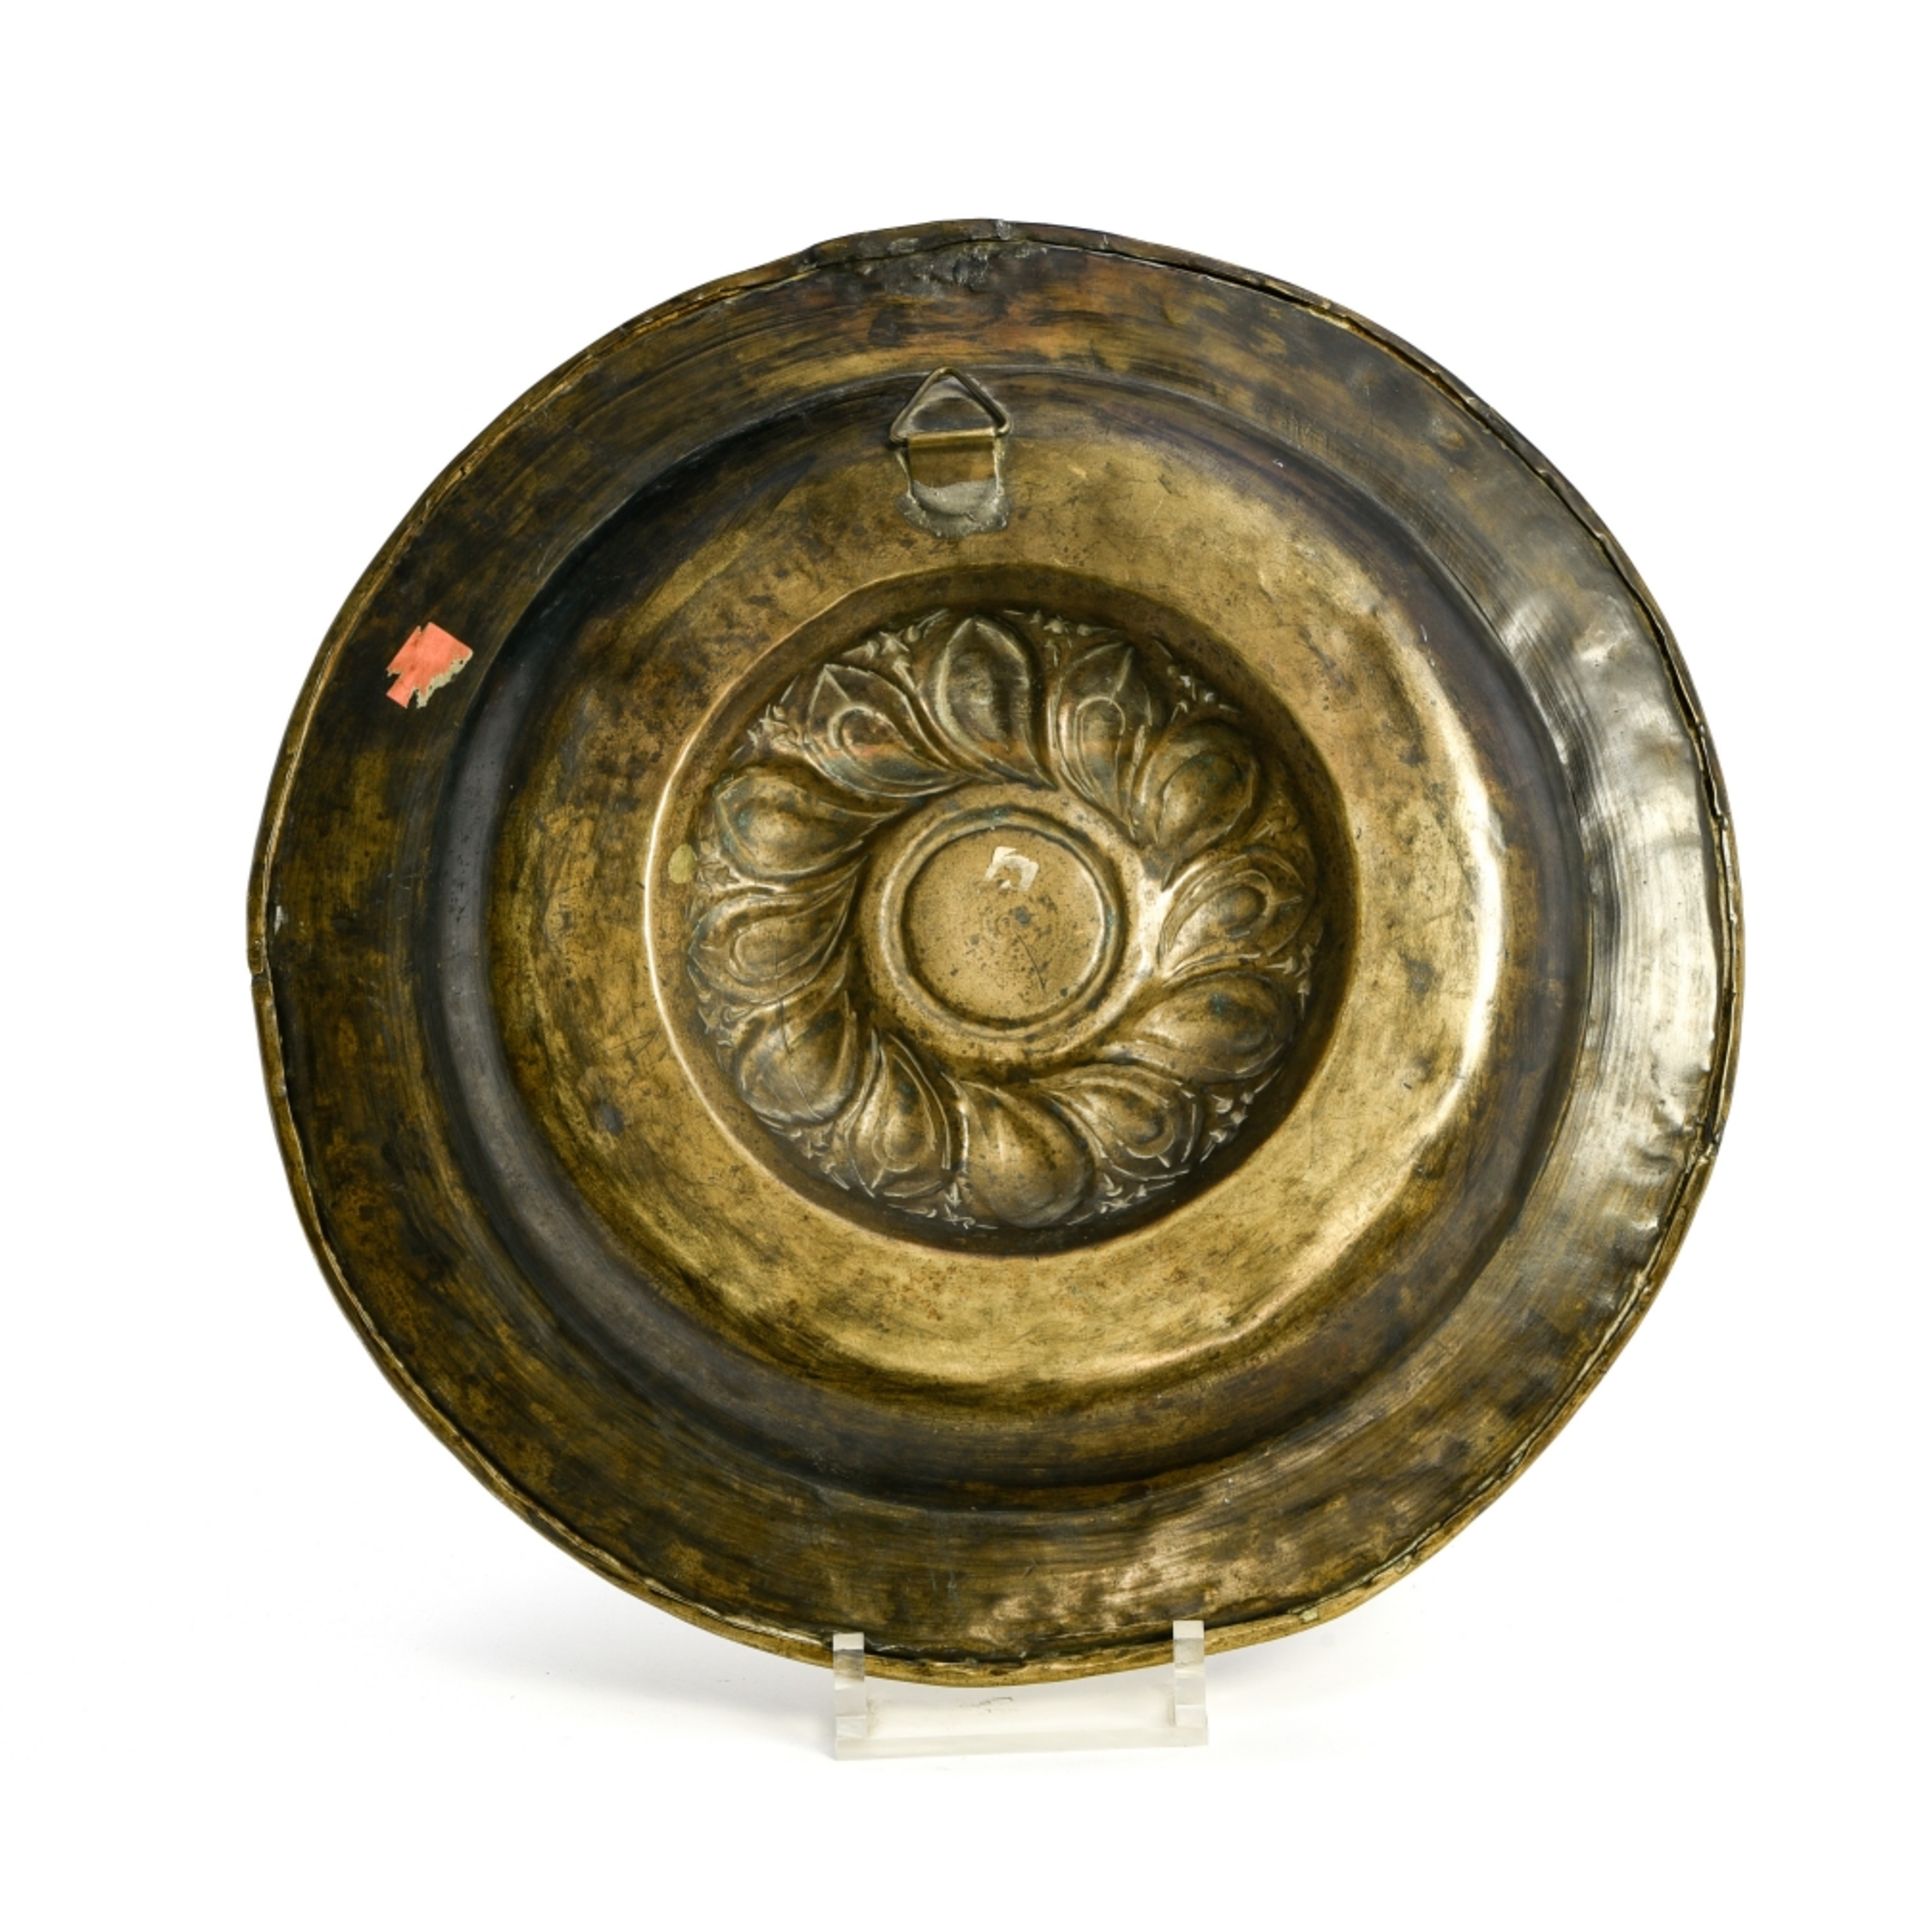 Large offering plate 17TH CENTURY WORK brass with embossed dŽcor of gadroons and inscriptions ( - Image 2 of 2